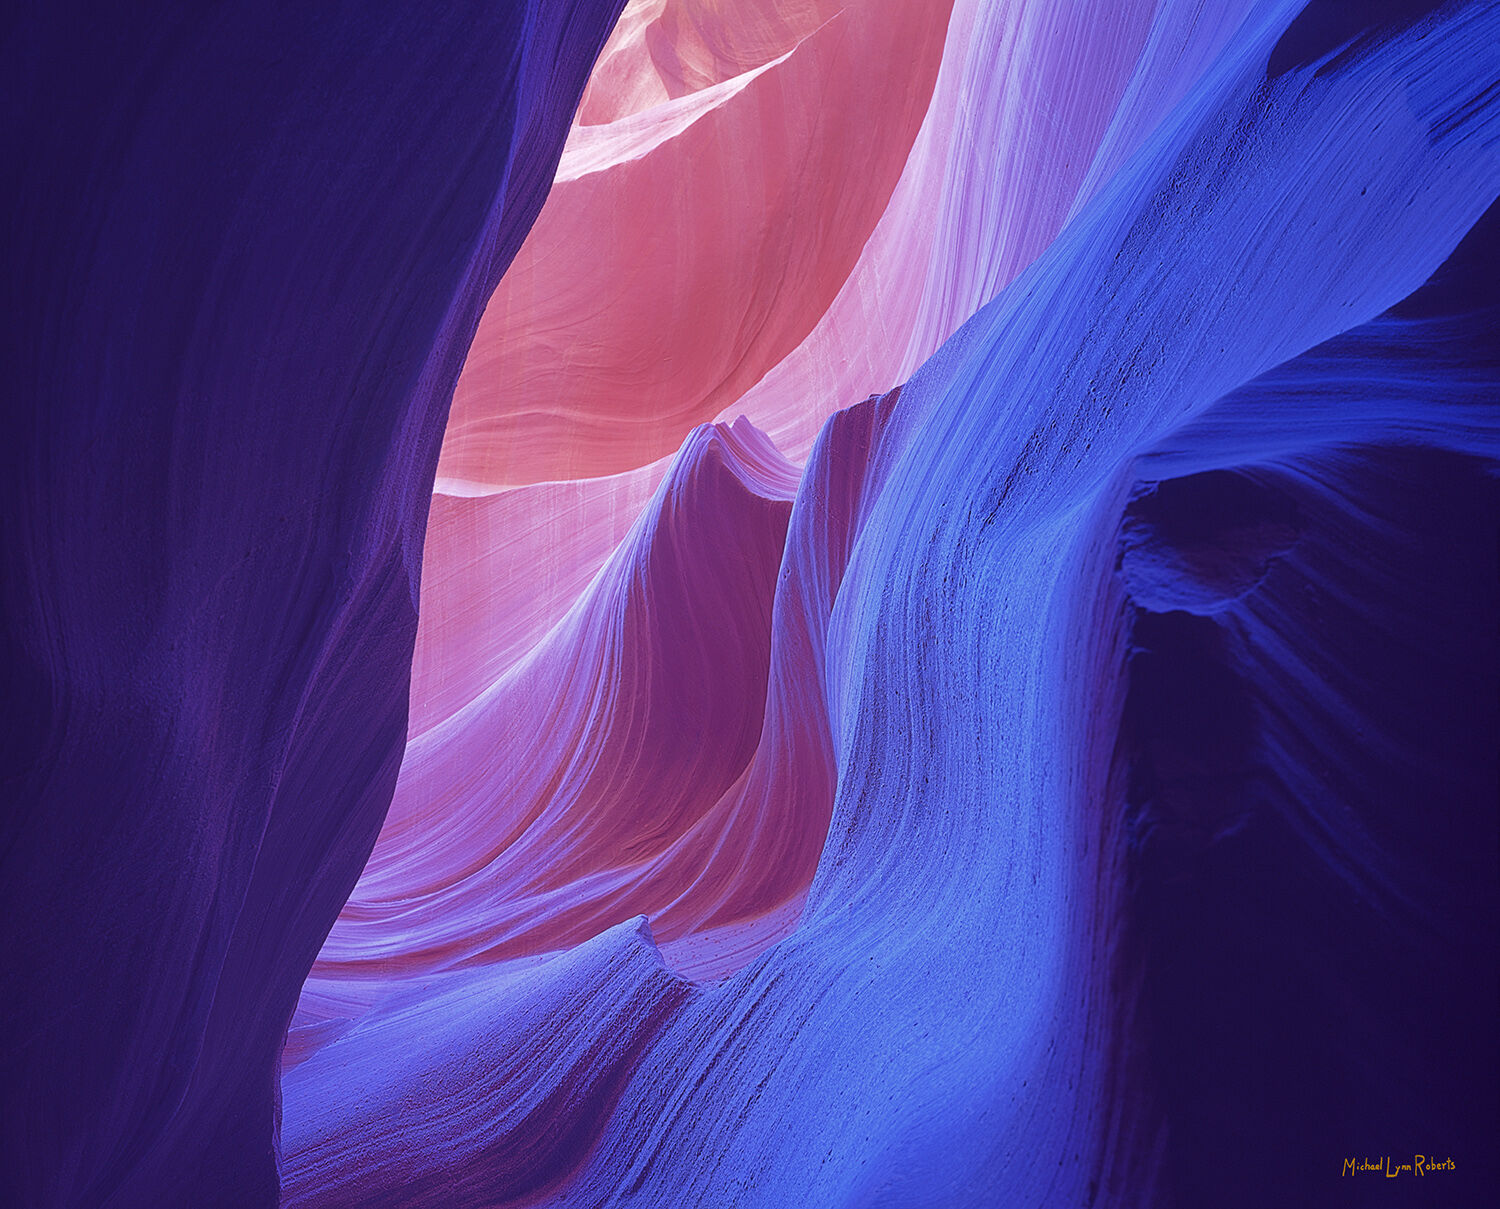 One of the beautiful things about abstract art is how it can stimulate the imagination. When I am working in slot canyons, I...